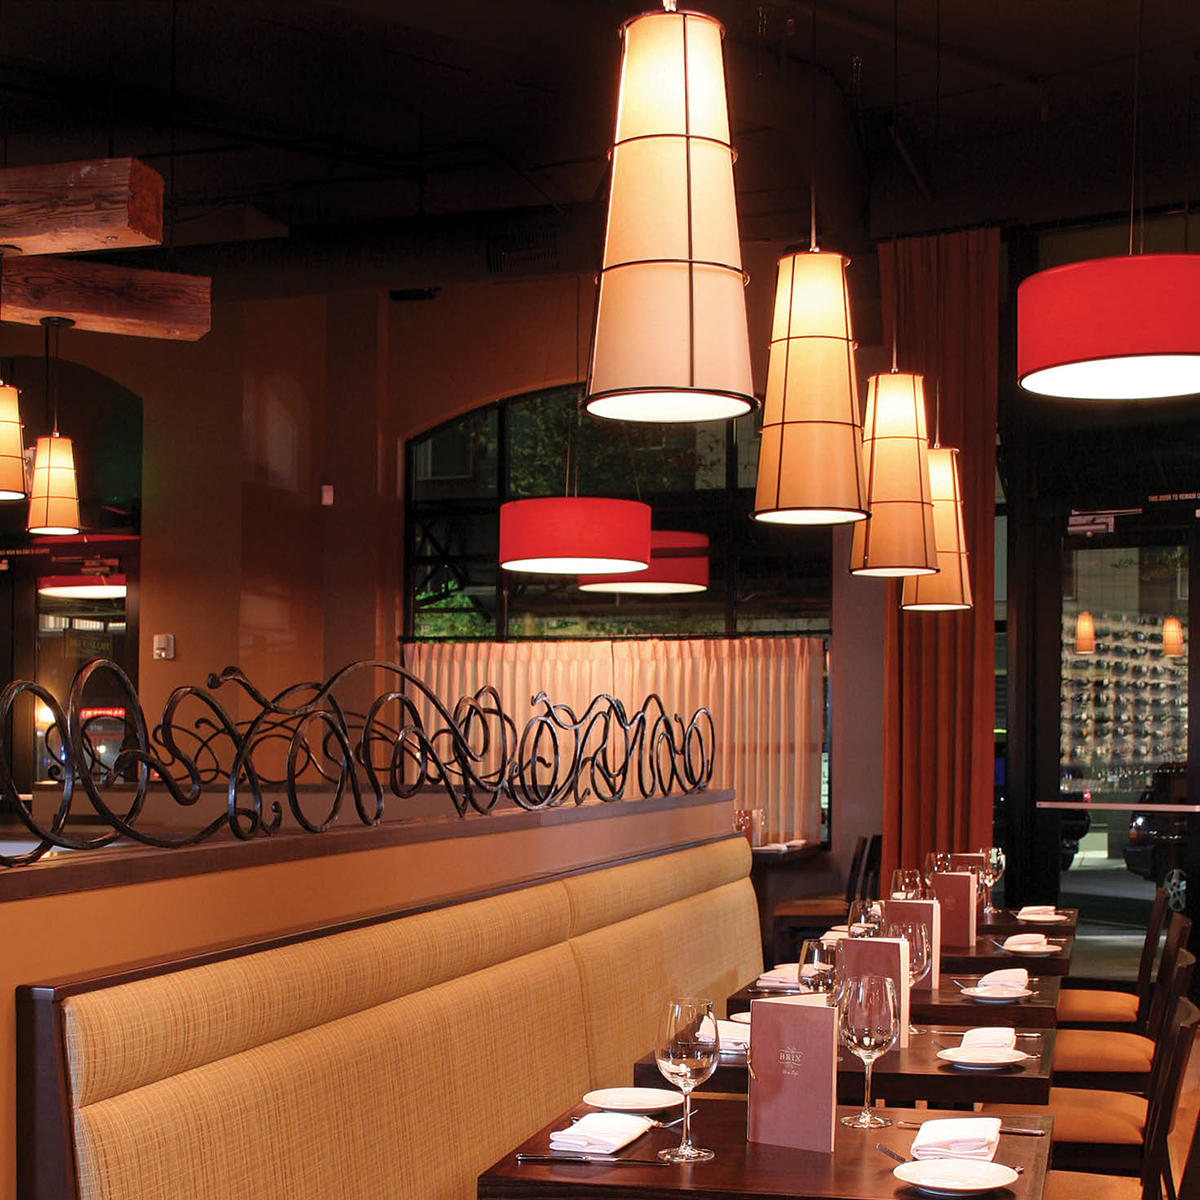 Cone and Drum Shaped Pendant Lighting Hang in Dining Room of Restaurant